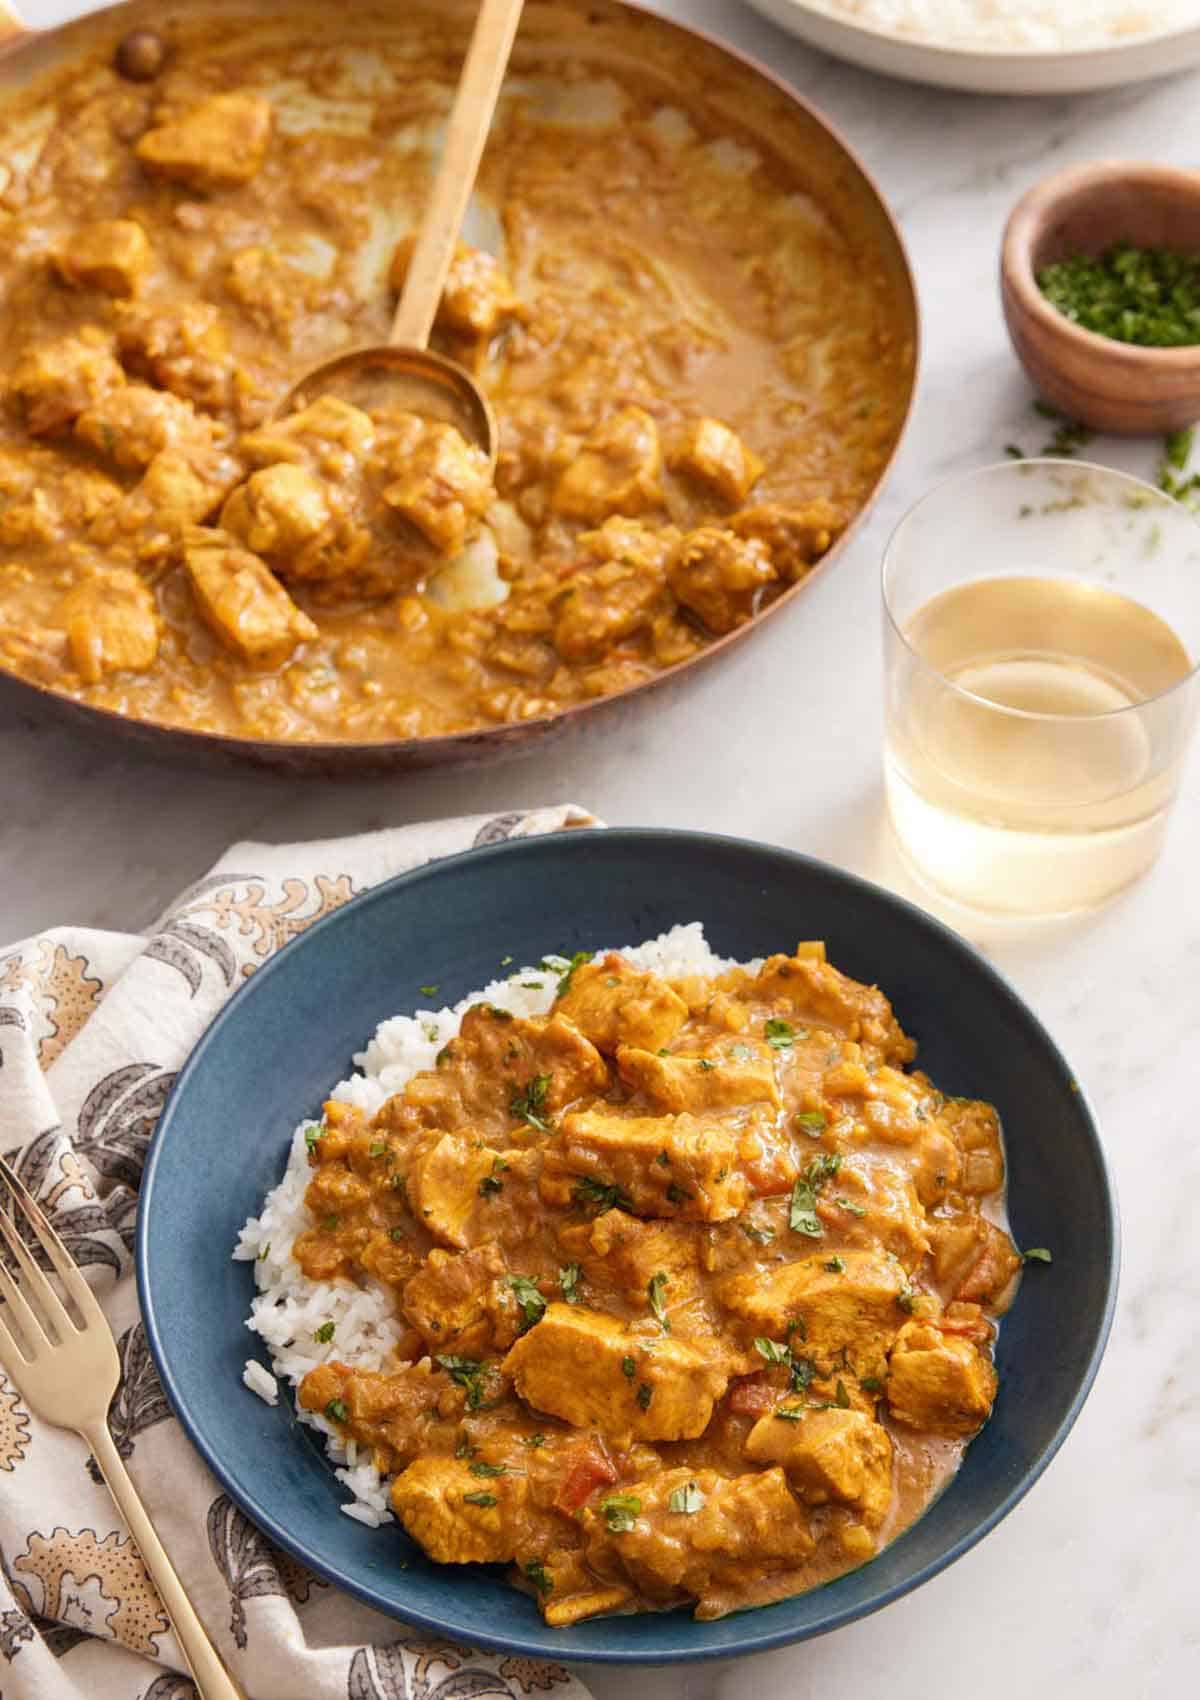 A bowl of chicken curry over rice with a skillet of more curry and glass of wine in the background.